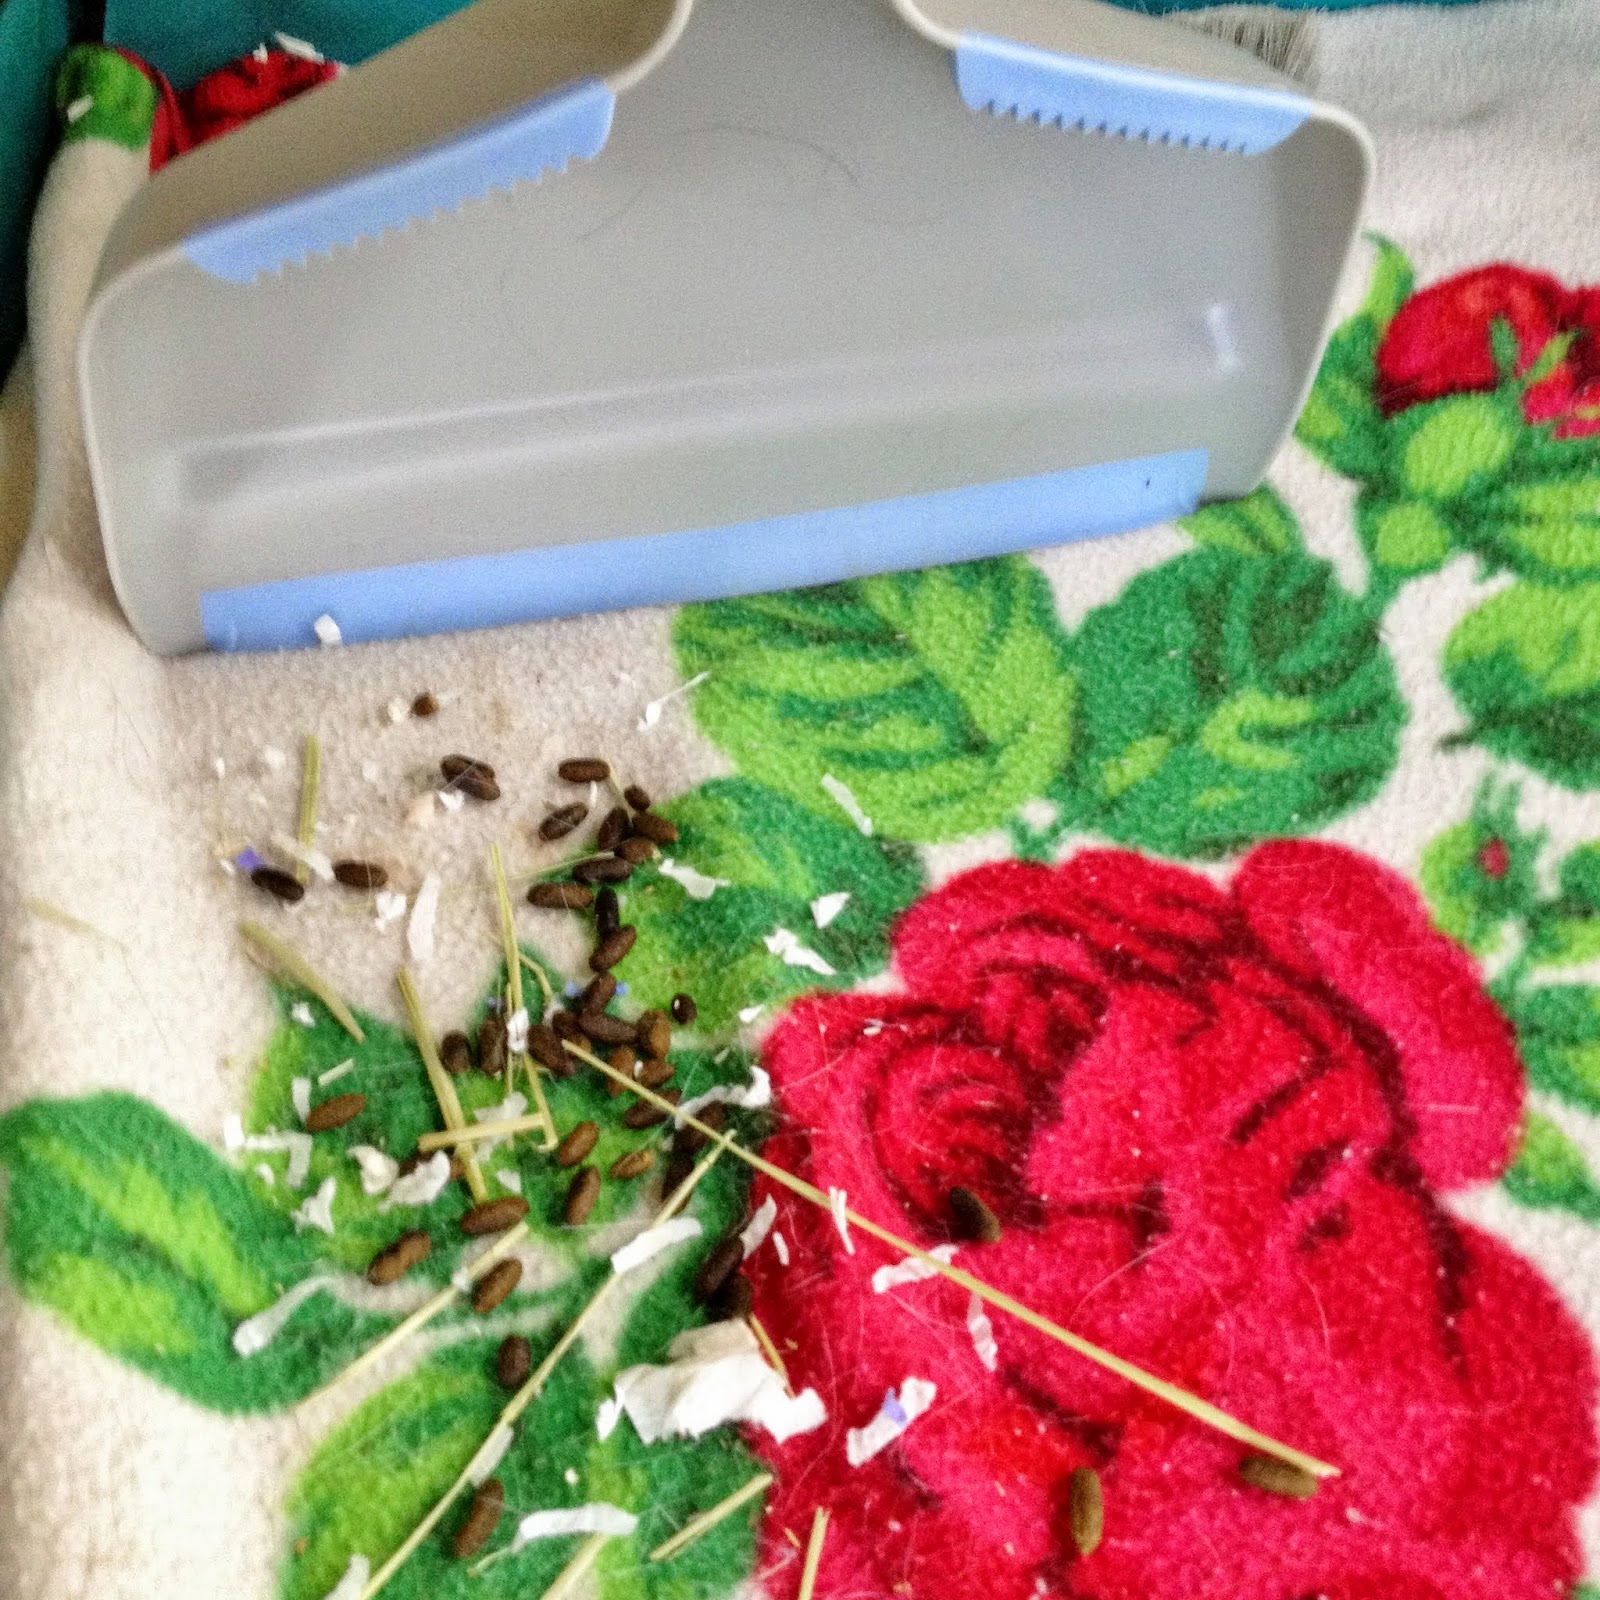 Use a dust pan to hold the fleece taut while sweeping.